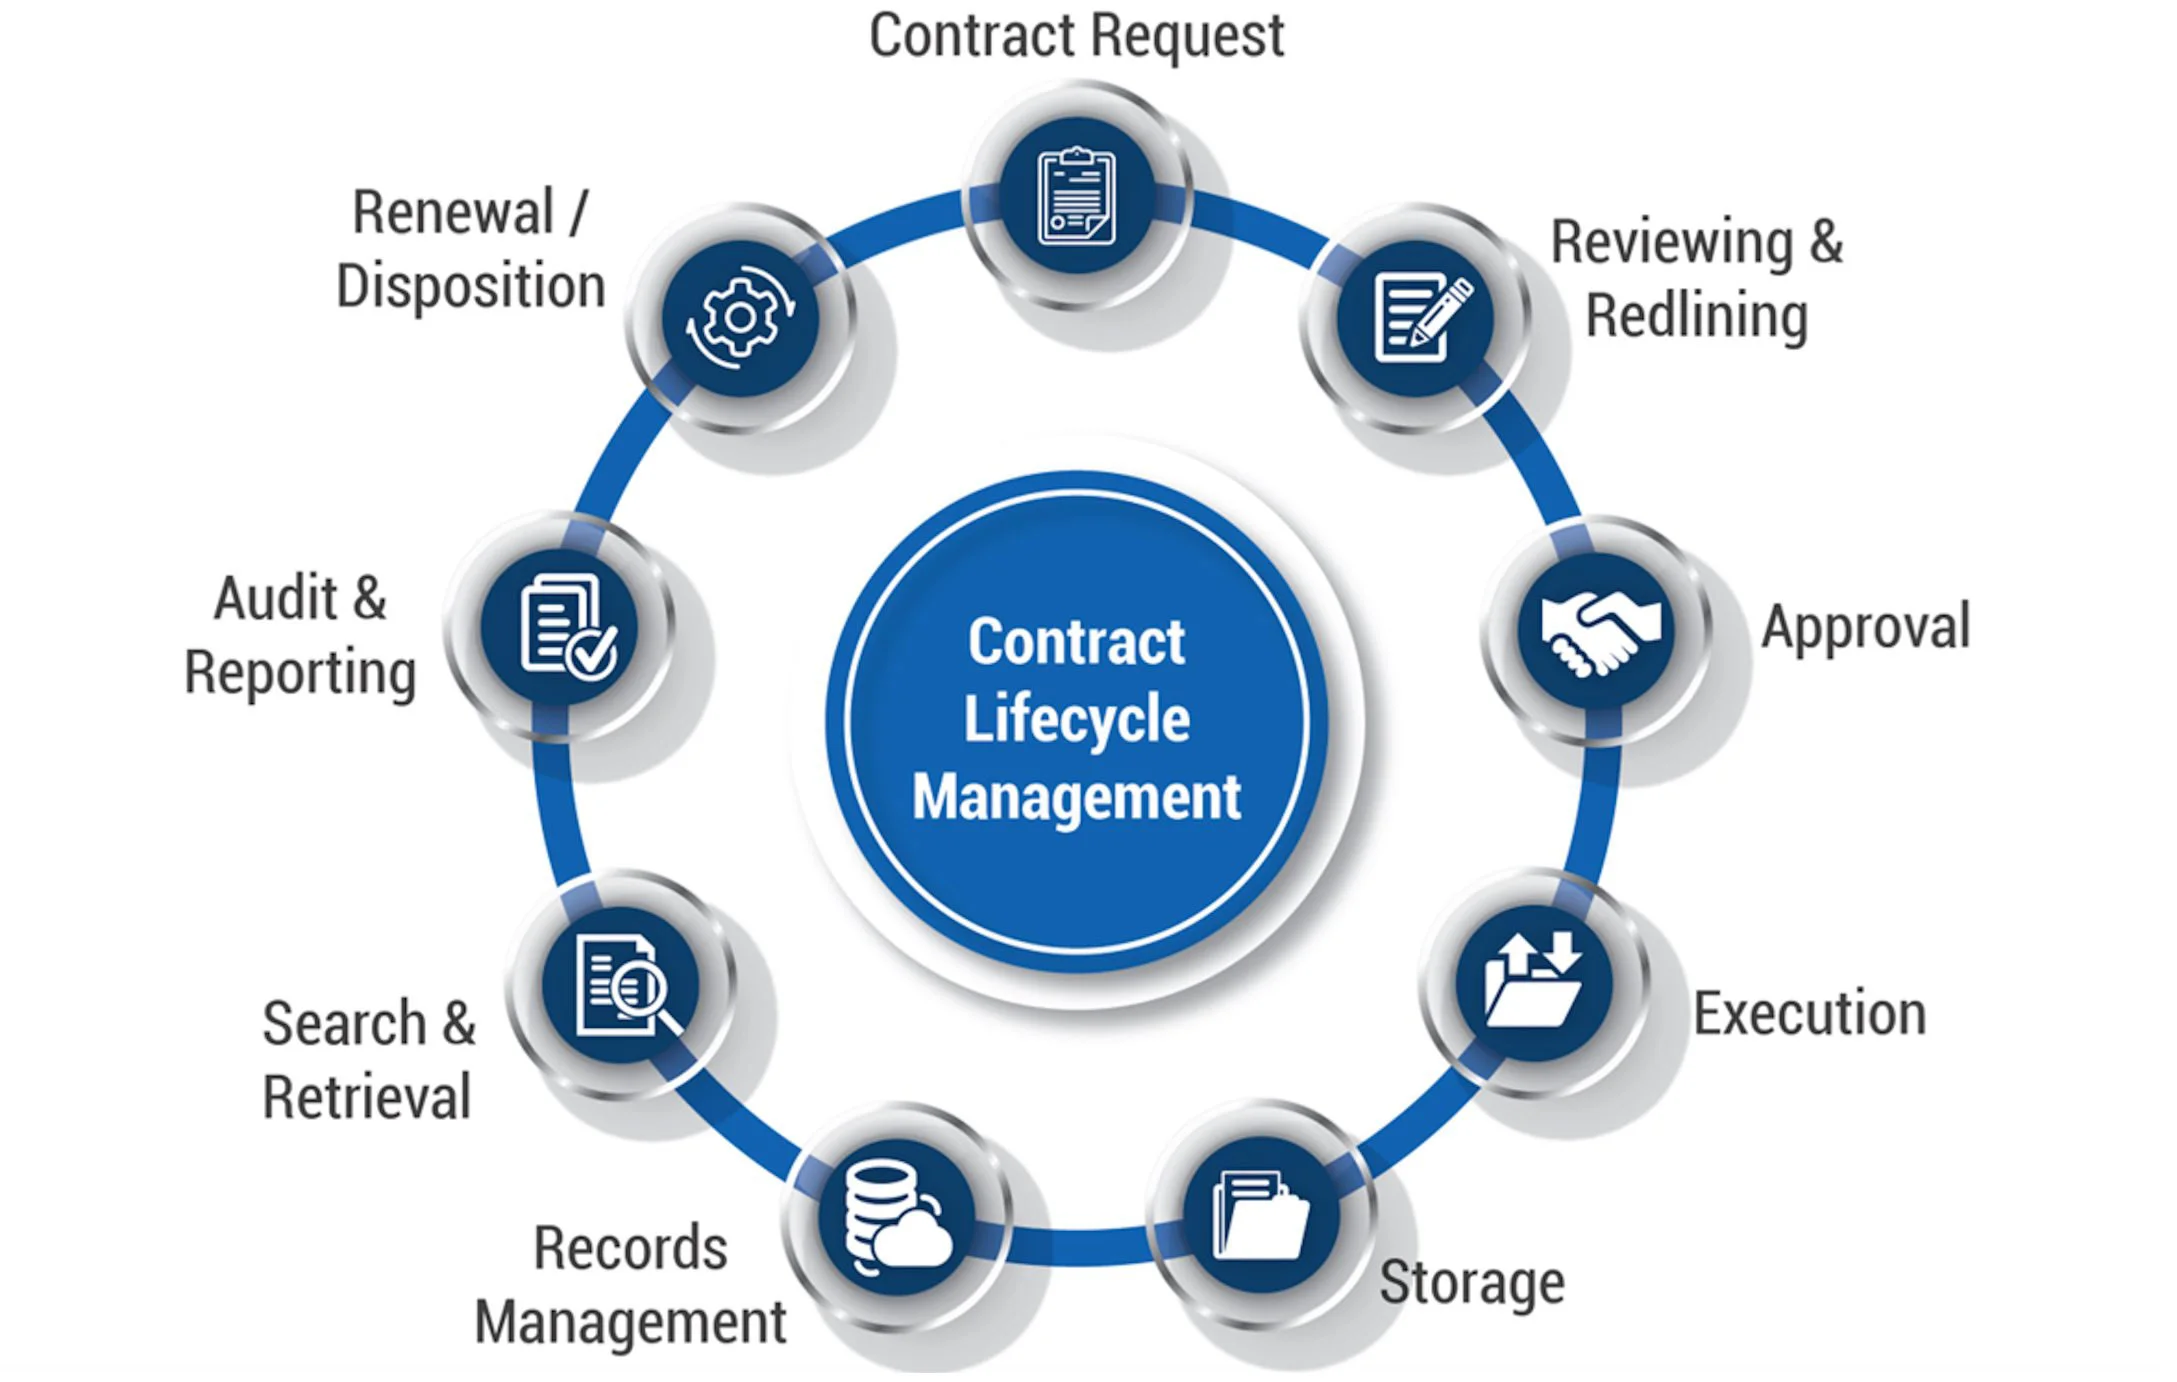 Contract lifecycle management software